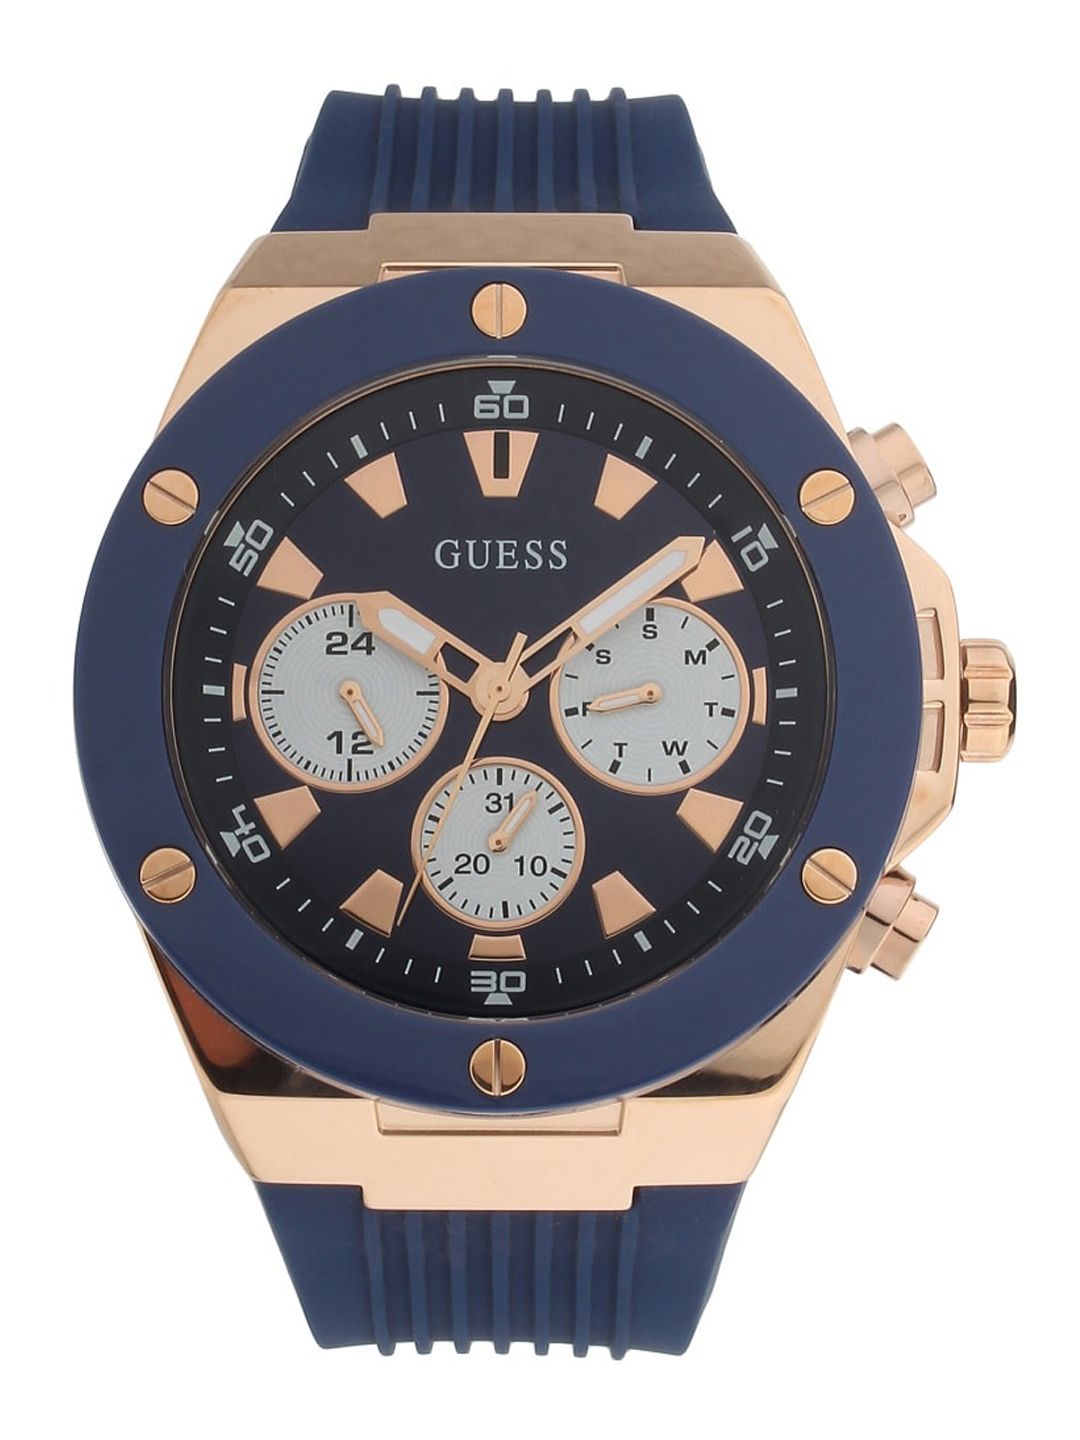 GUESS Men Blue & Gold-Toned Analogue Watch GW0057G2 - Price History